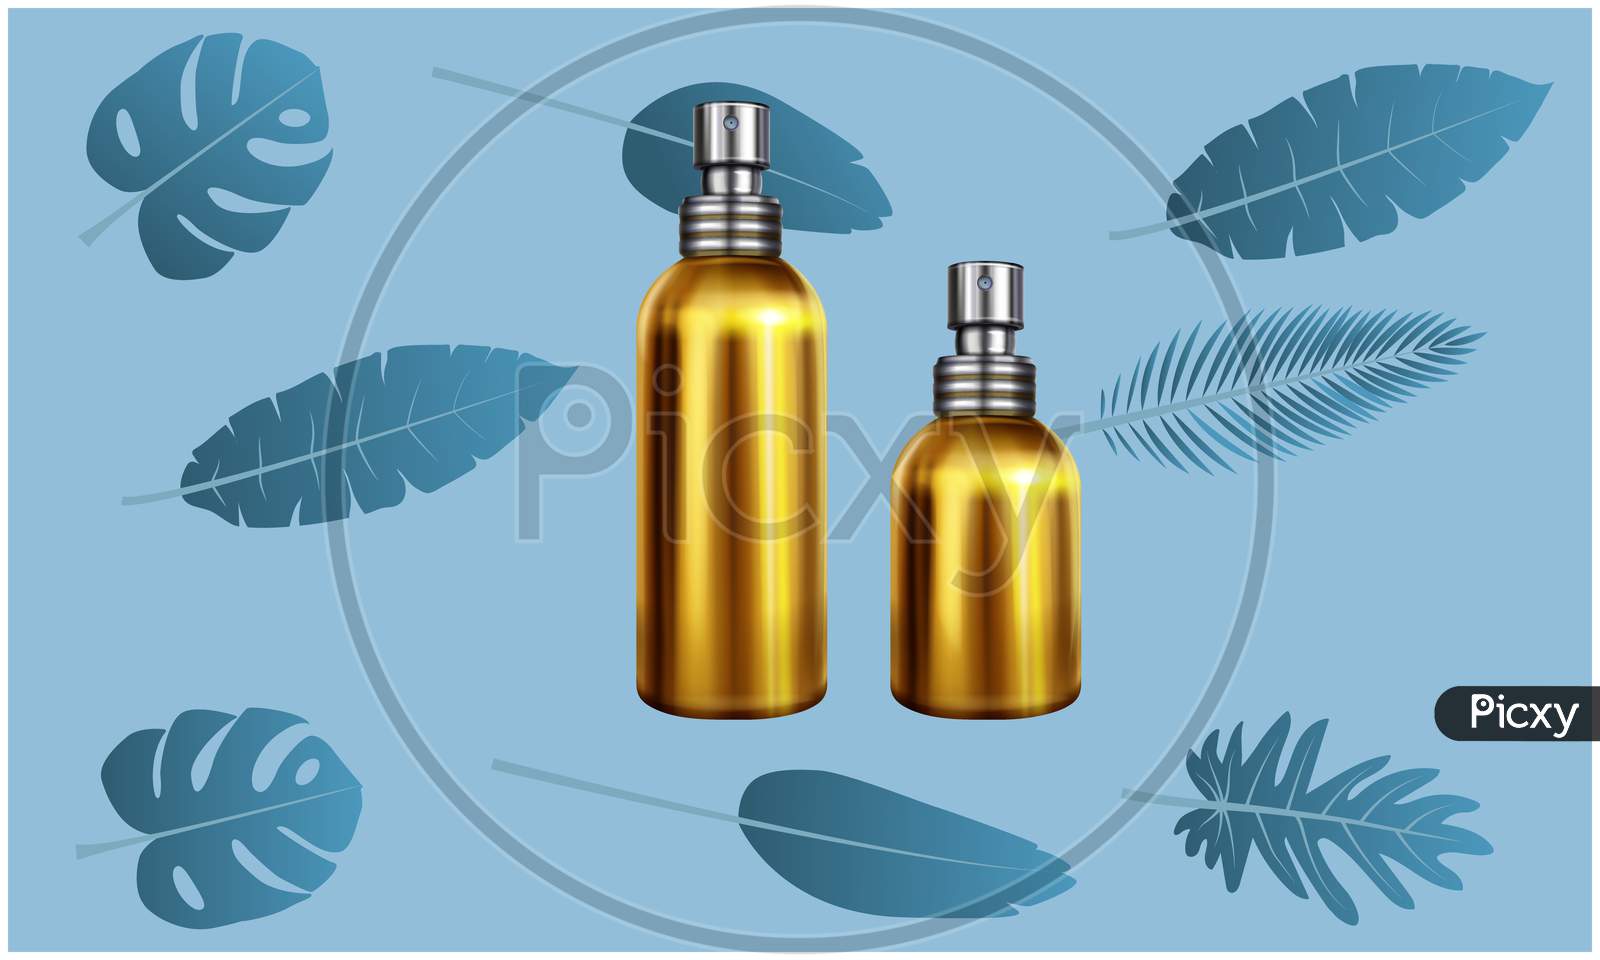 Mock Up Illustration Of Different Size Of Perfume On Abstract Leaves Background